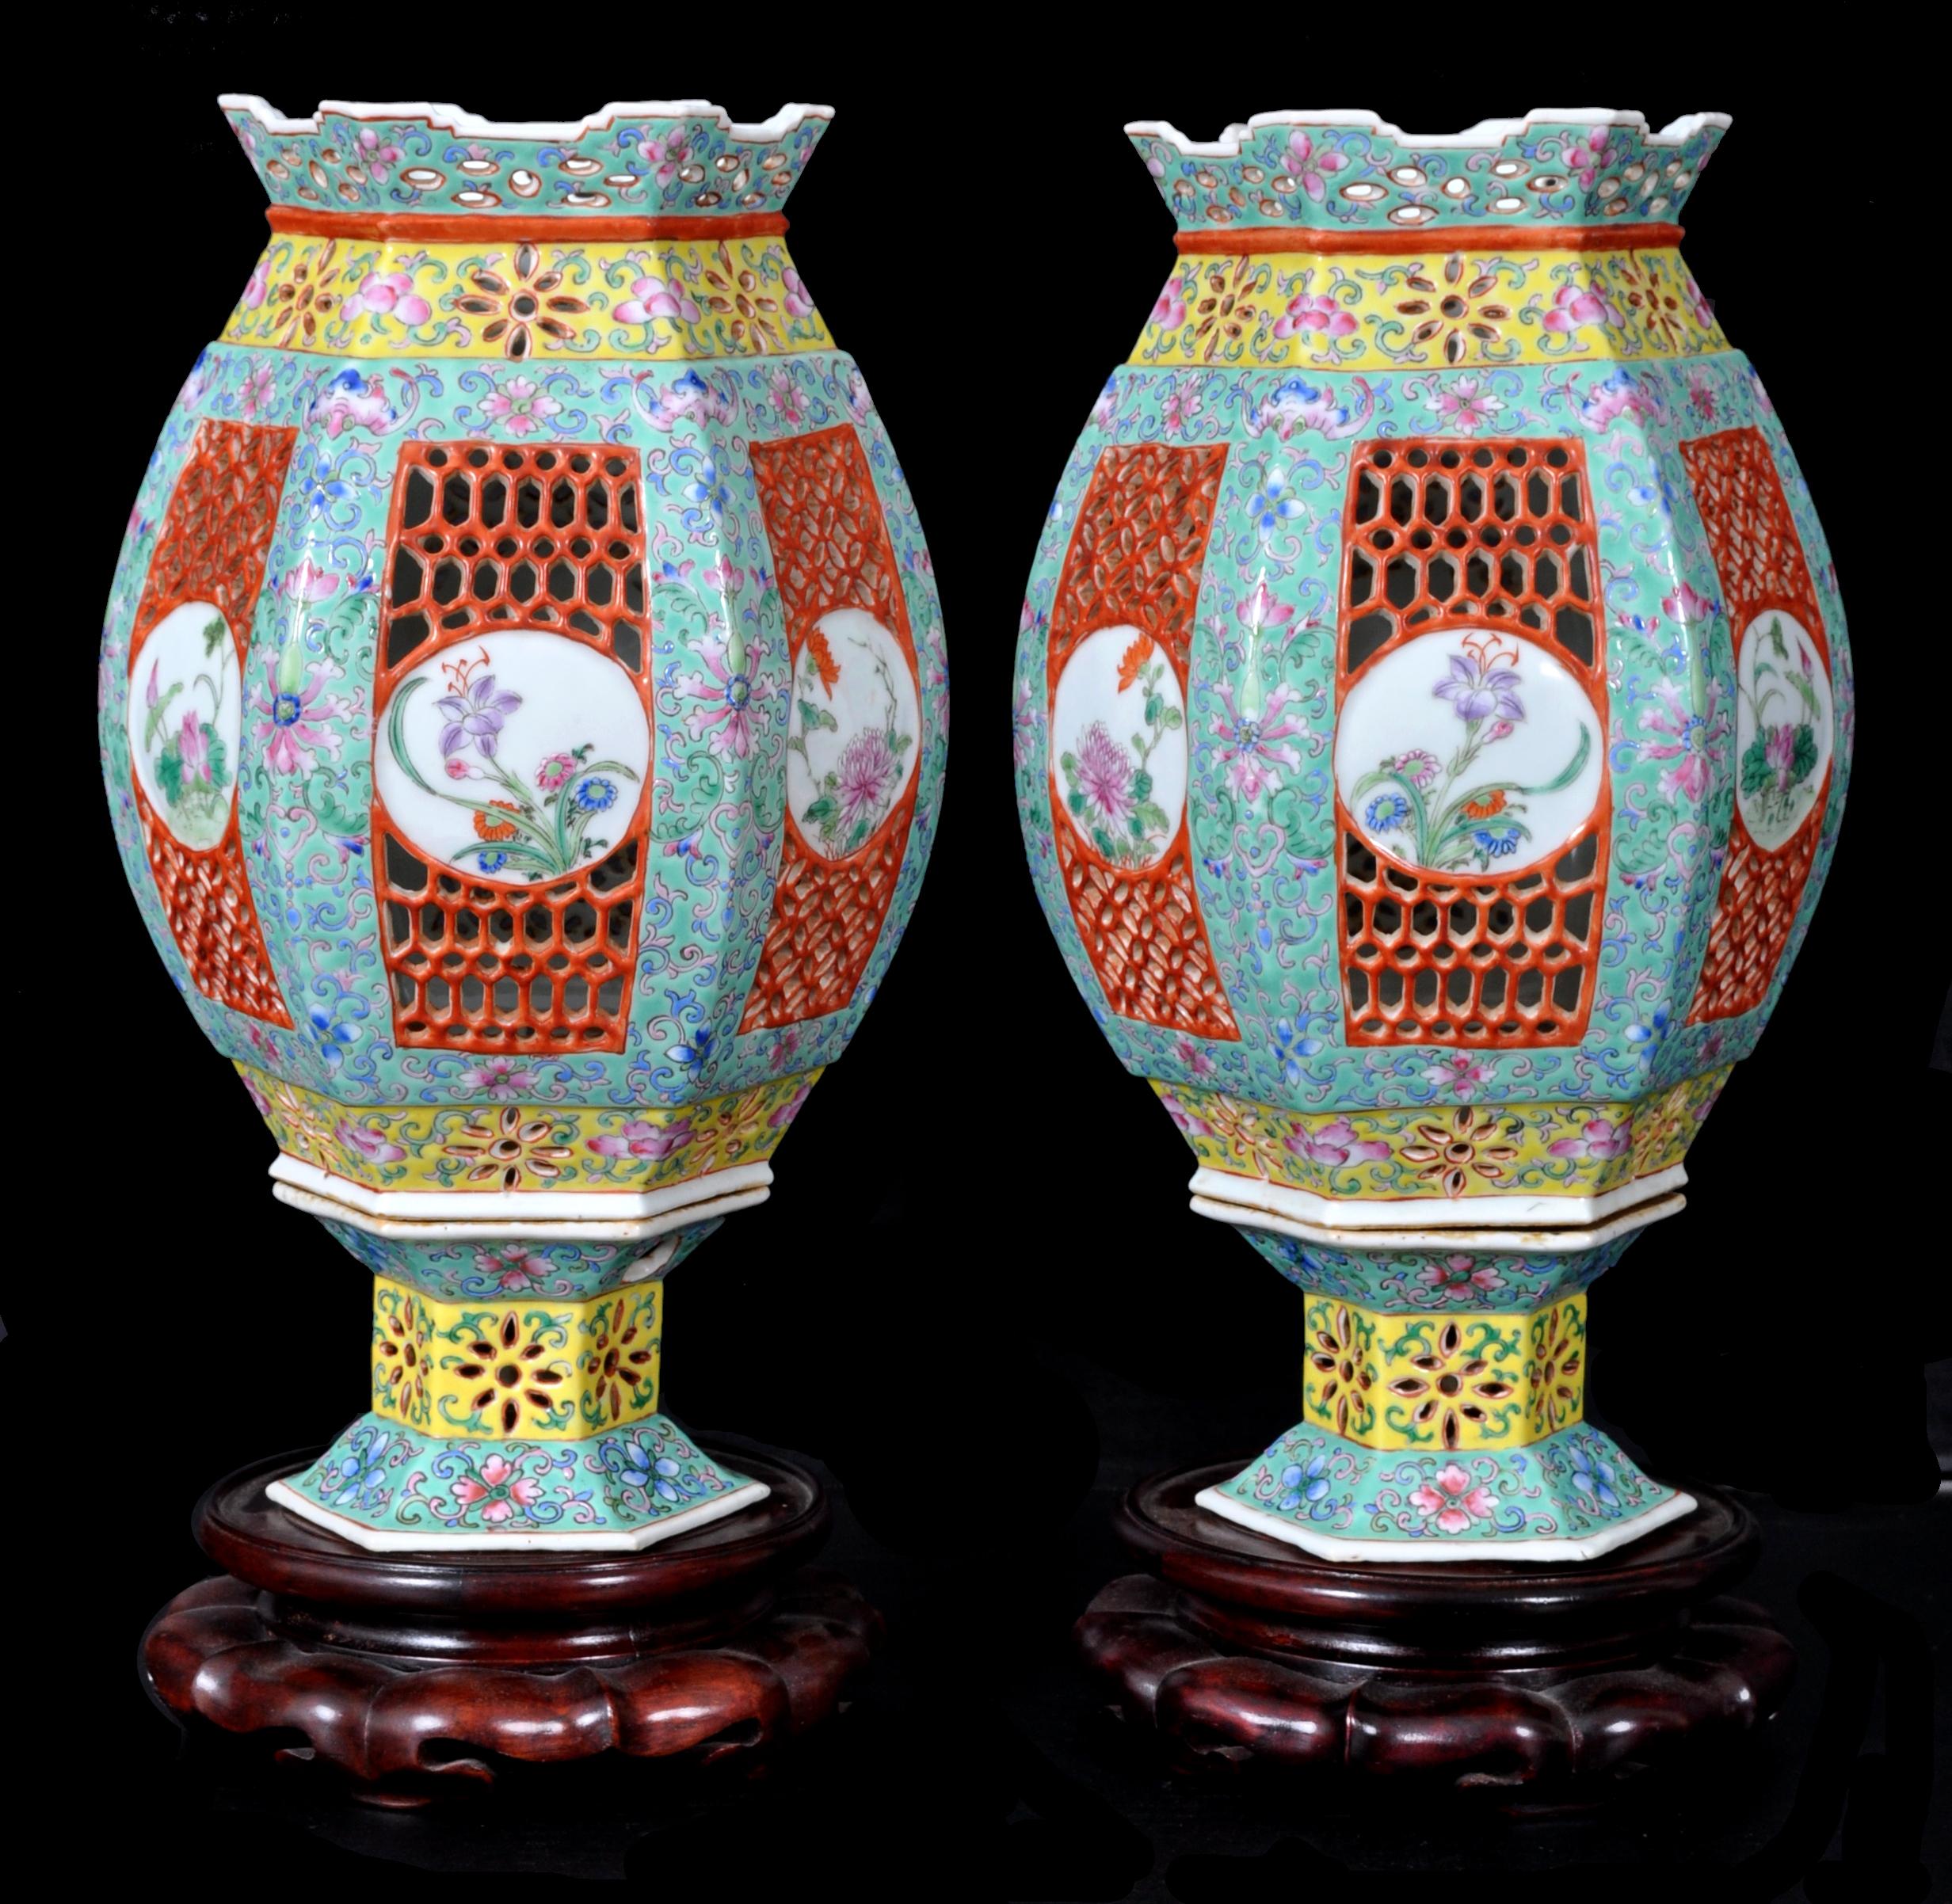 Pair of antique Chinese Republican Period imperial porcelain wedding lanterns / vases, circa 1920s. The lanterns are very finely modeled and having stepped and pierced tops, and decorated with yellow bands below that are also pierced and decorated